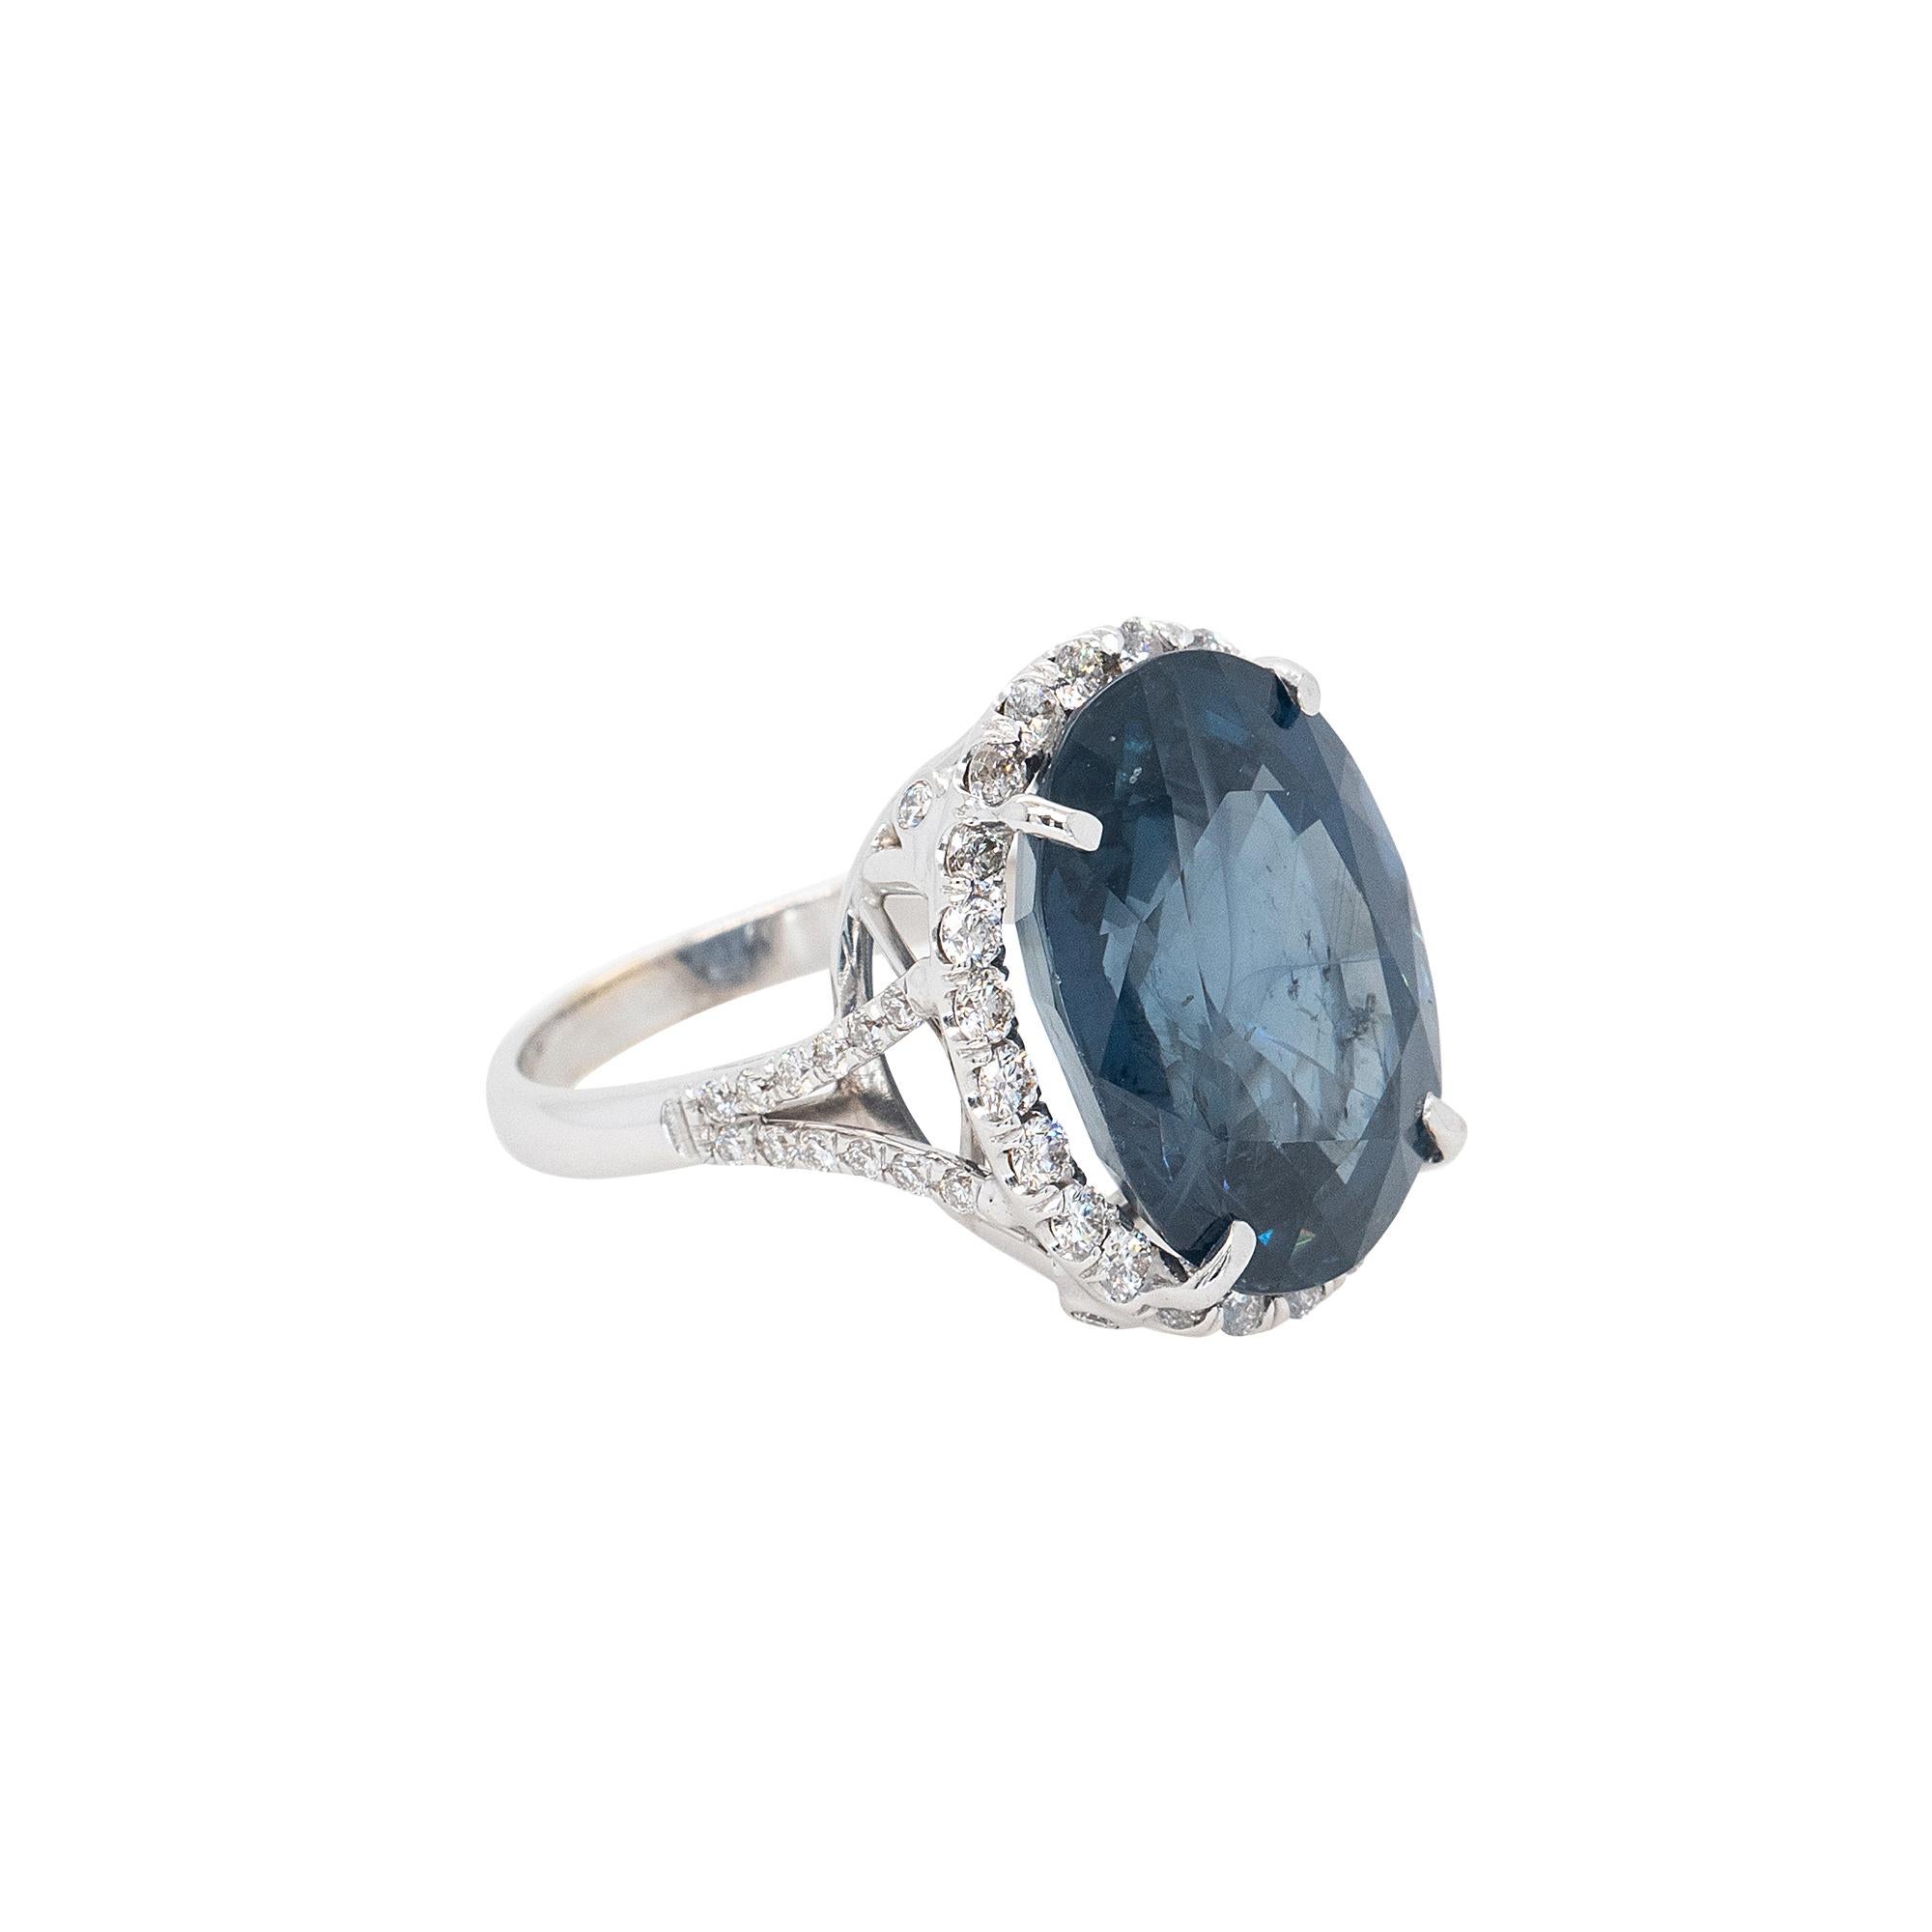 Center Details: 18.41ct Oval Sapphire
Ring Material:	
18k White Gold
Approx 1ctw Natural Round Brilliant Cut Diamonds (48 Diamonds)
20mm x 20mm x 30mm
Ring Size: 7 (can be sized)
Total Weight: 9.8g (6.3dwt)
This item comes with a presentation